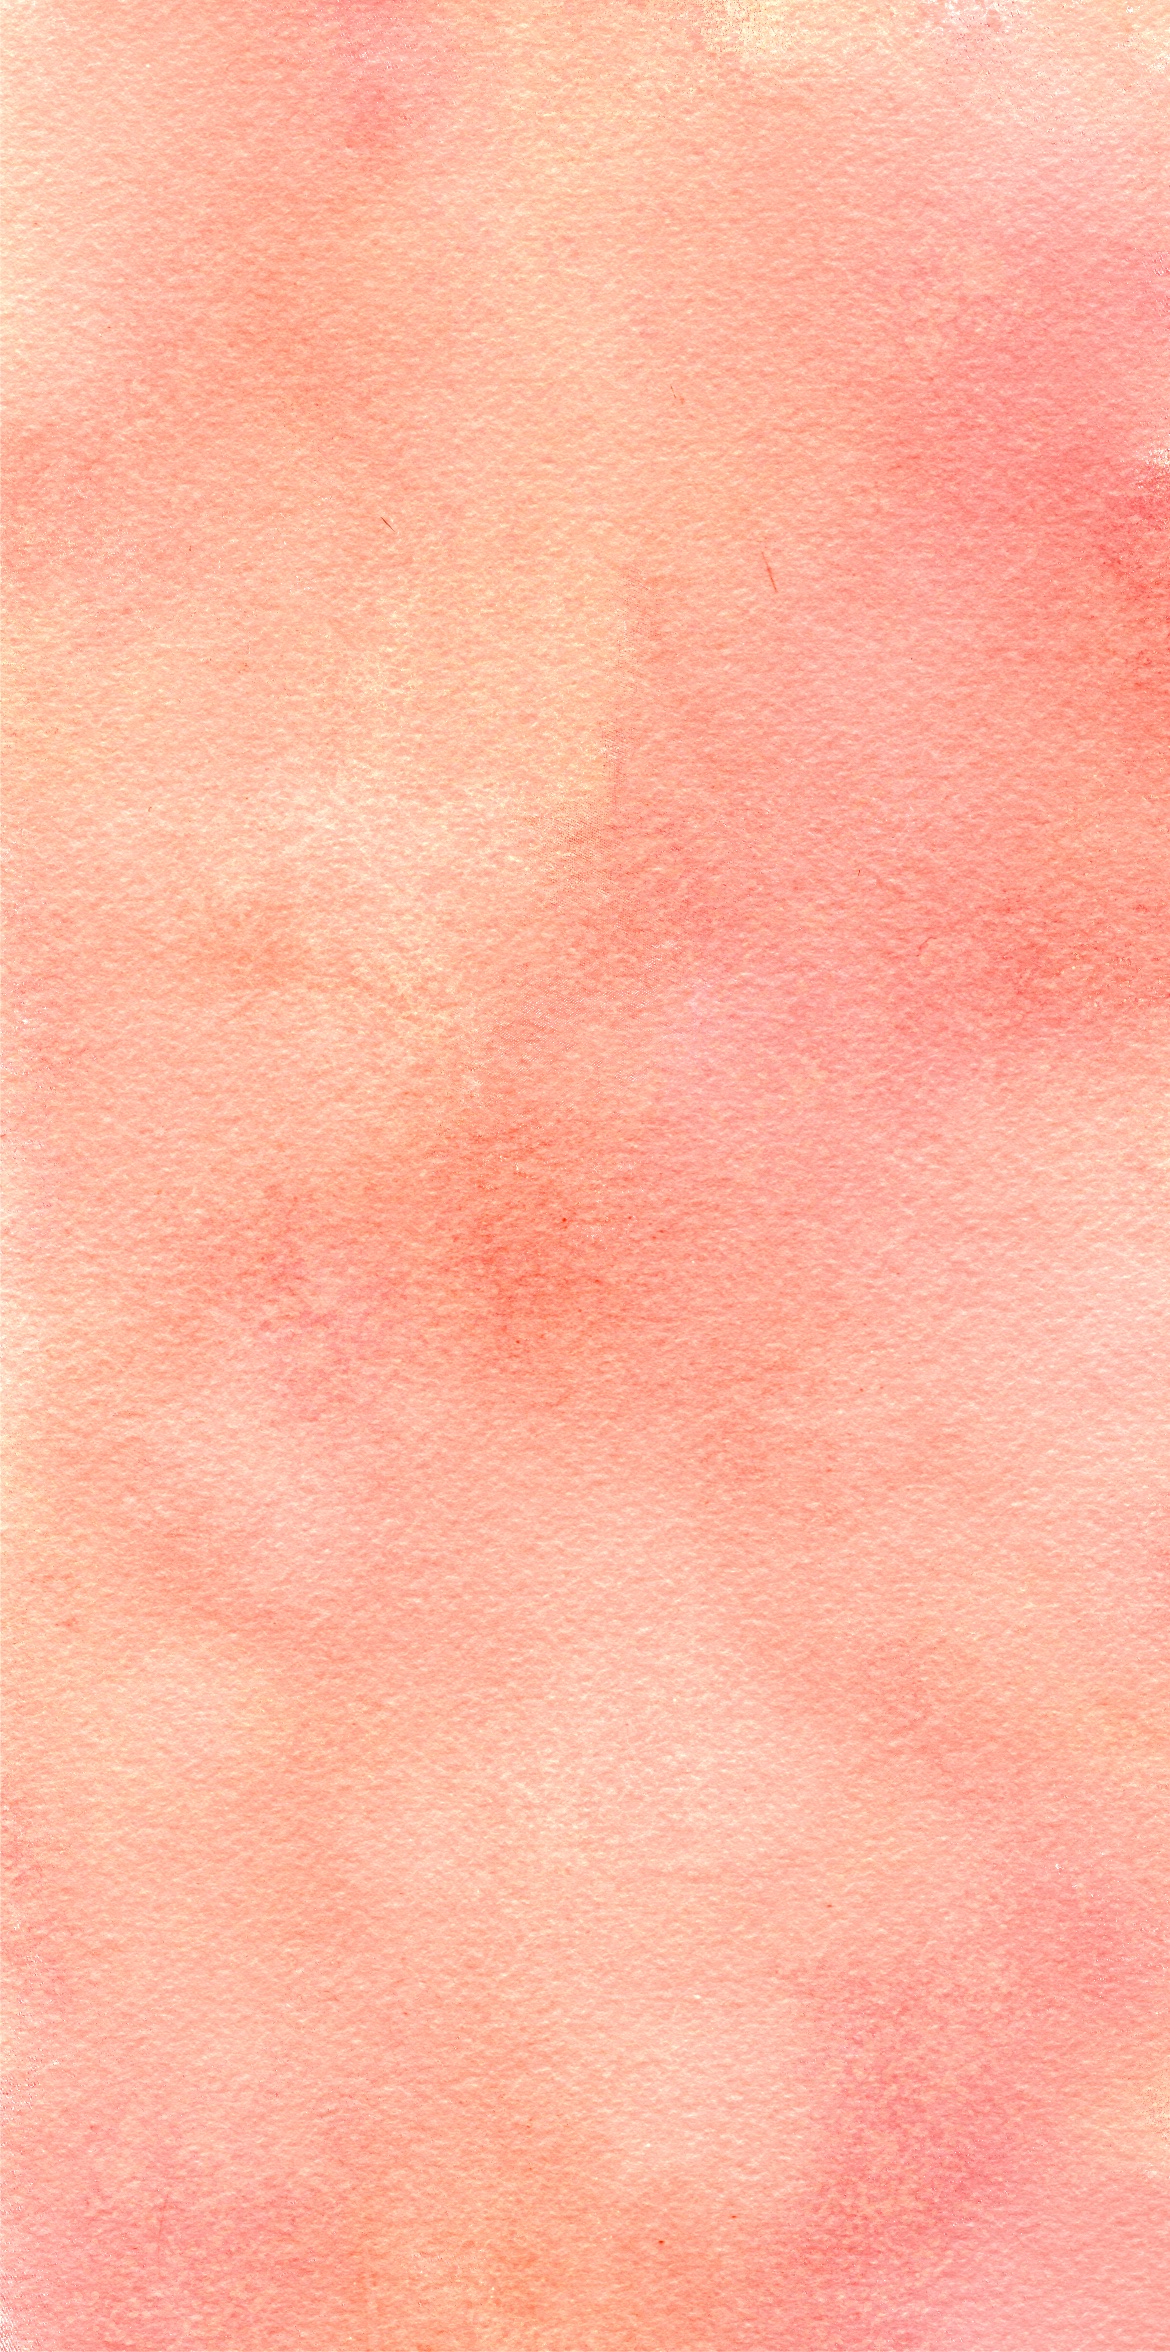 Wallpaper with pink splotches